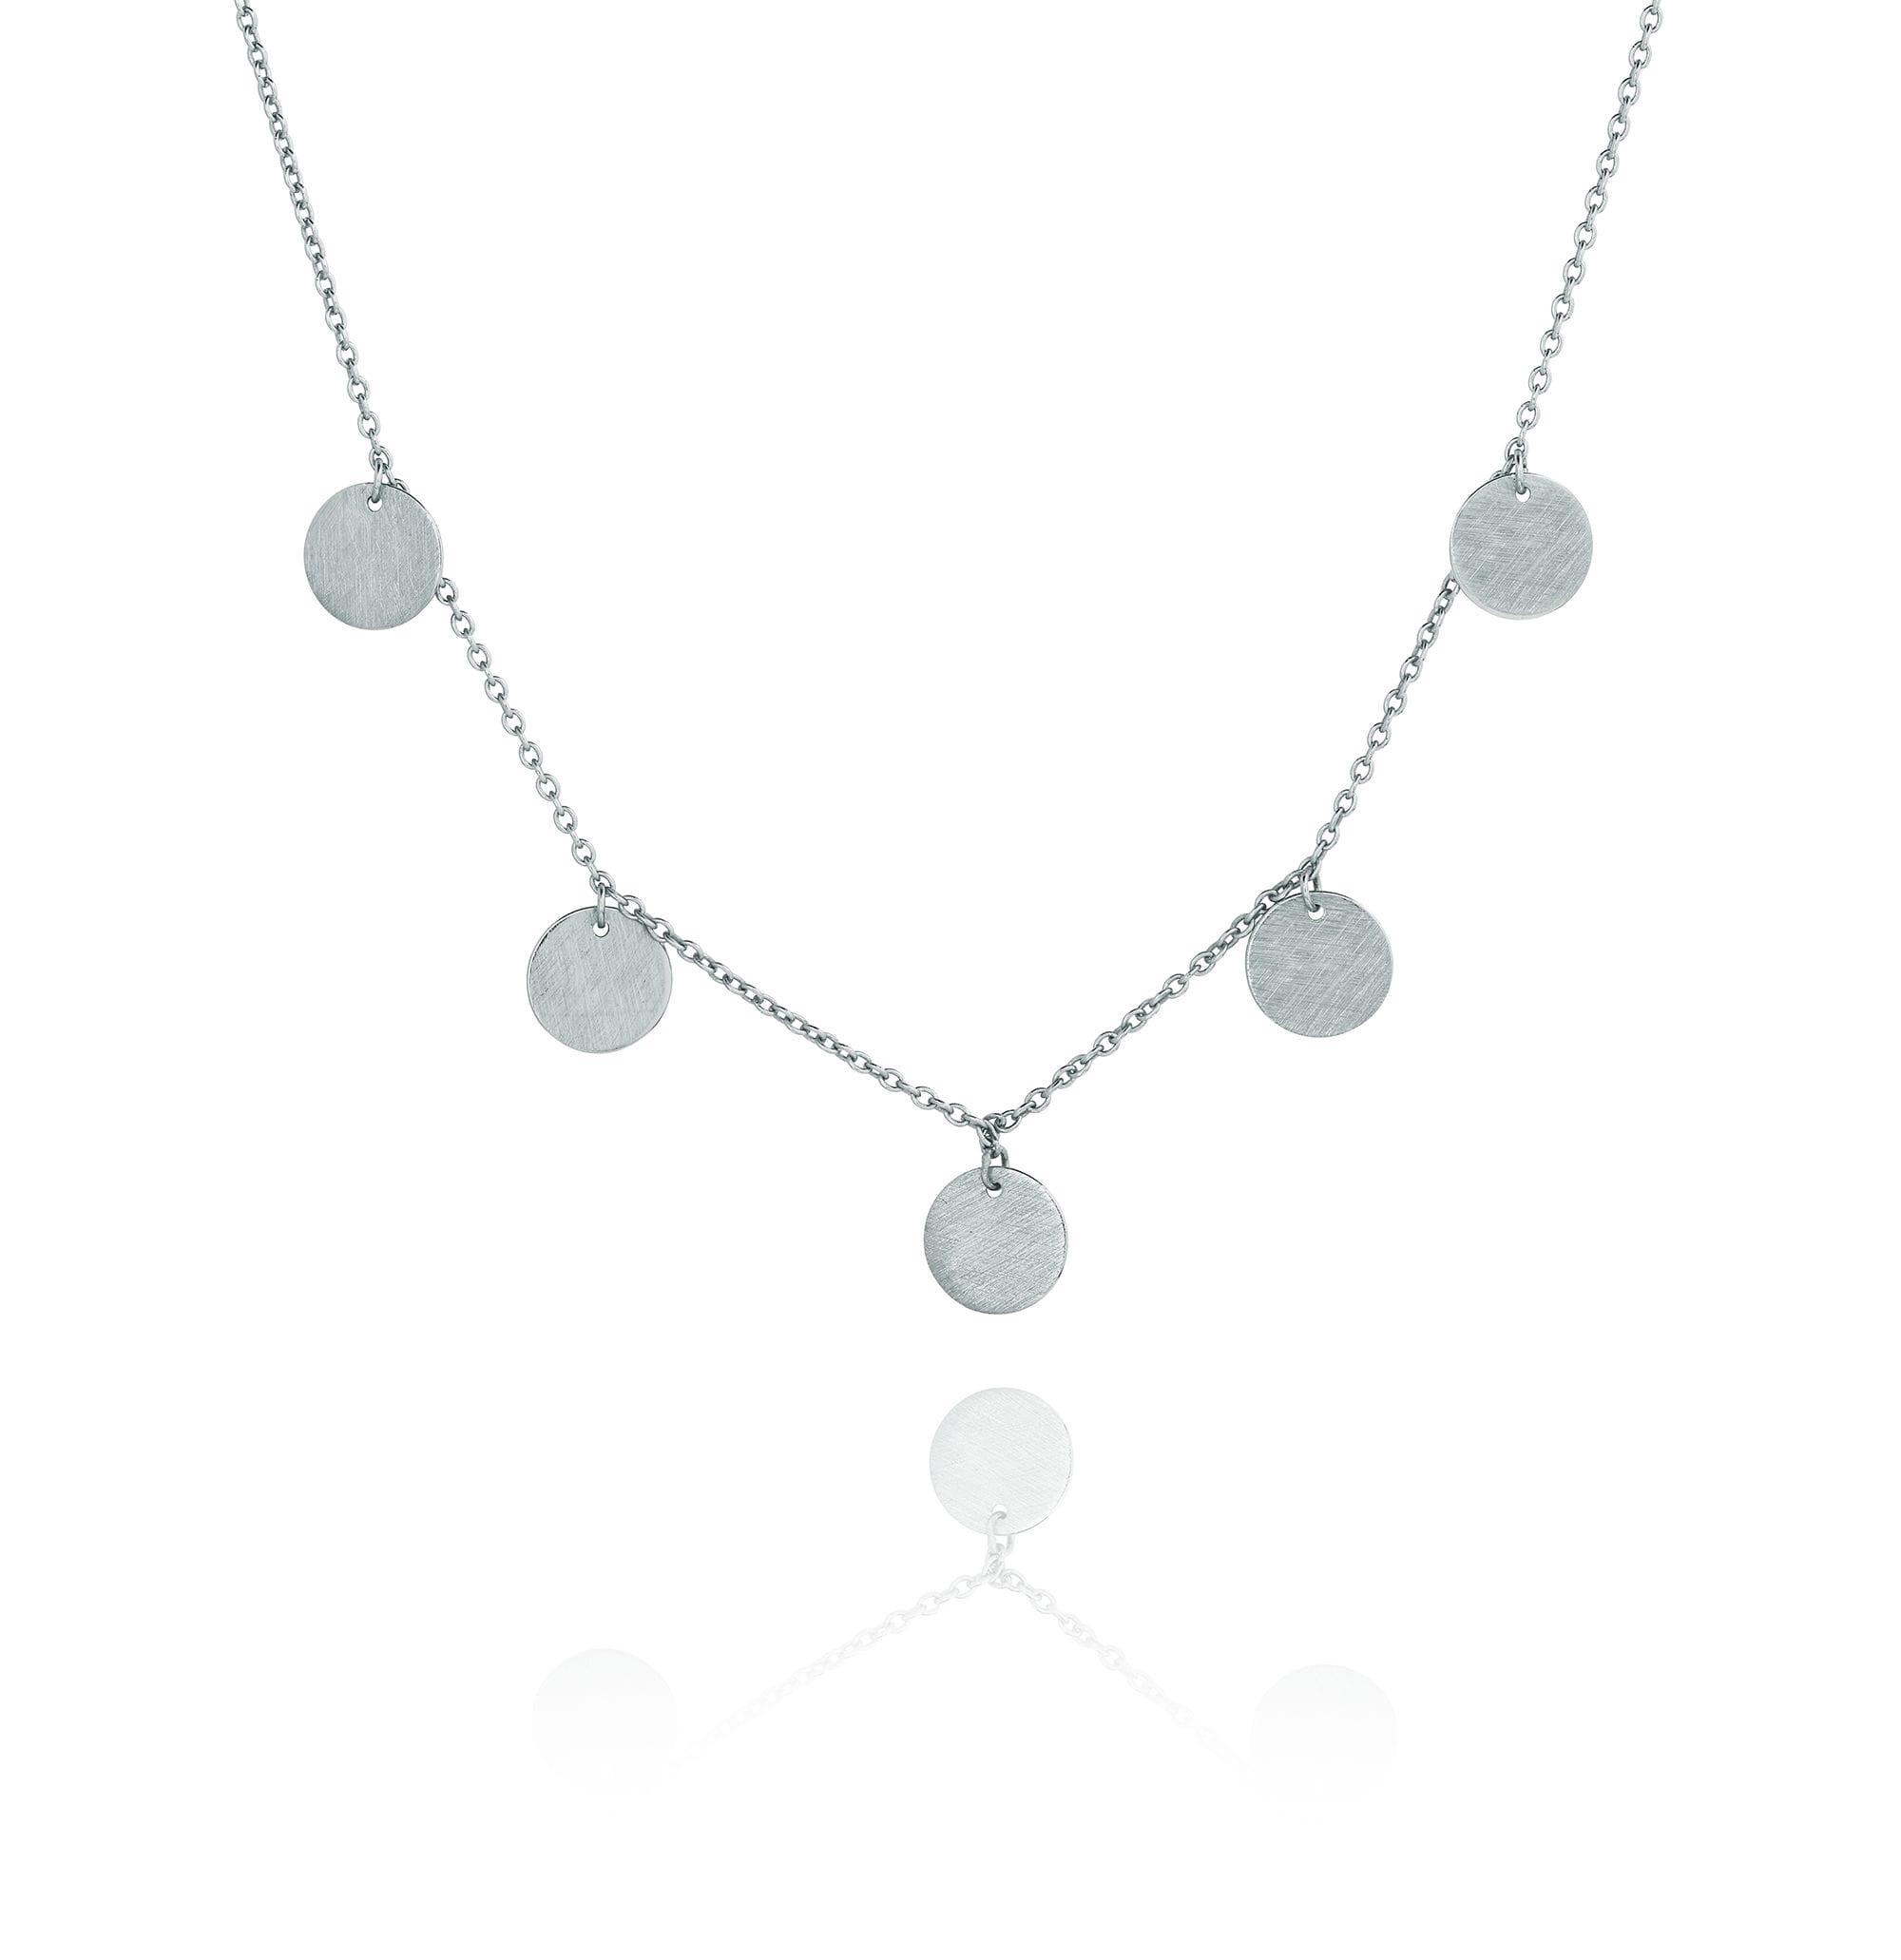 Multi Disc Necklace personalised and crafted by Silvery Jewellery